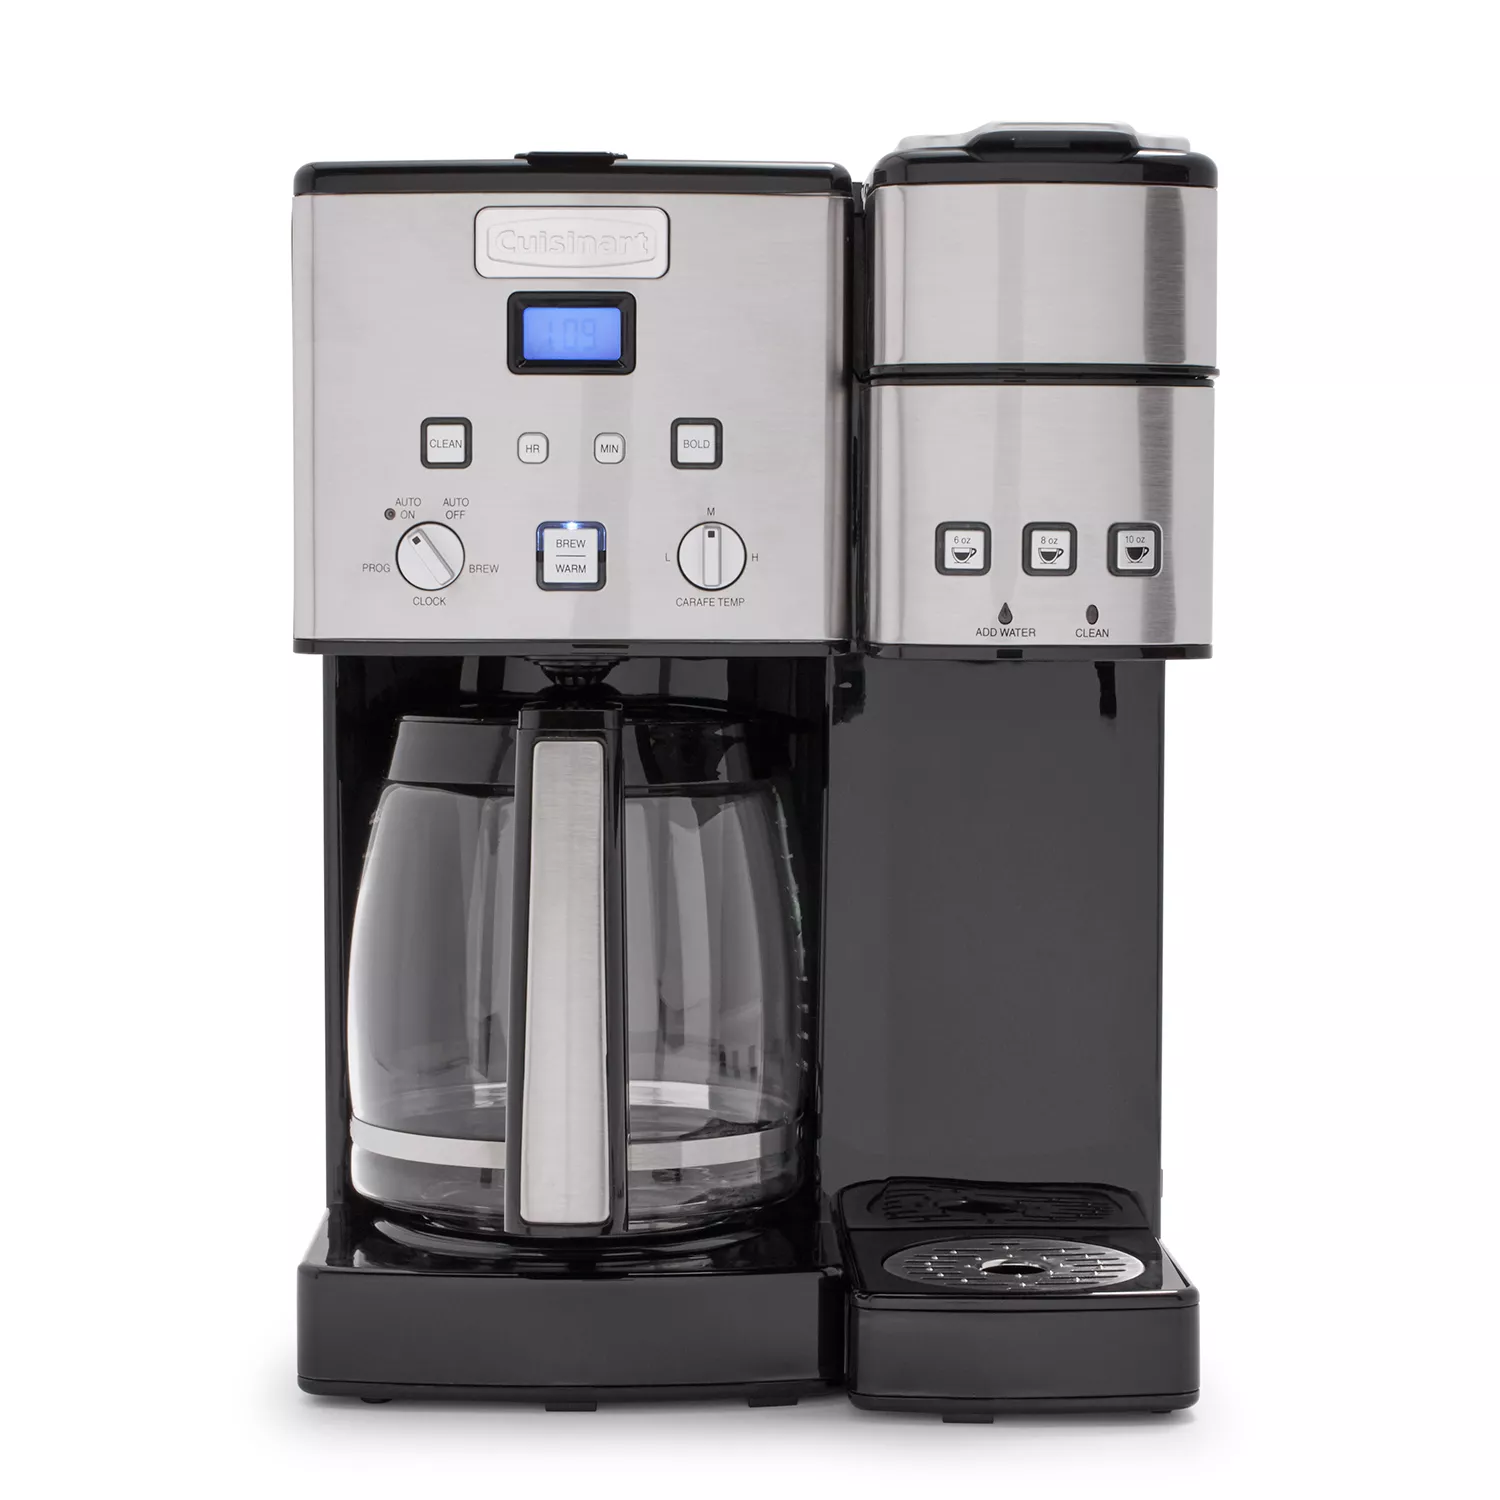 Sur La Table 12 Cup Automatic Drip Coffeemaker with Thermal Carafe - Charcoal